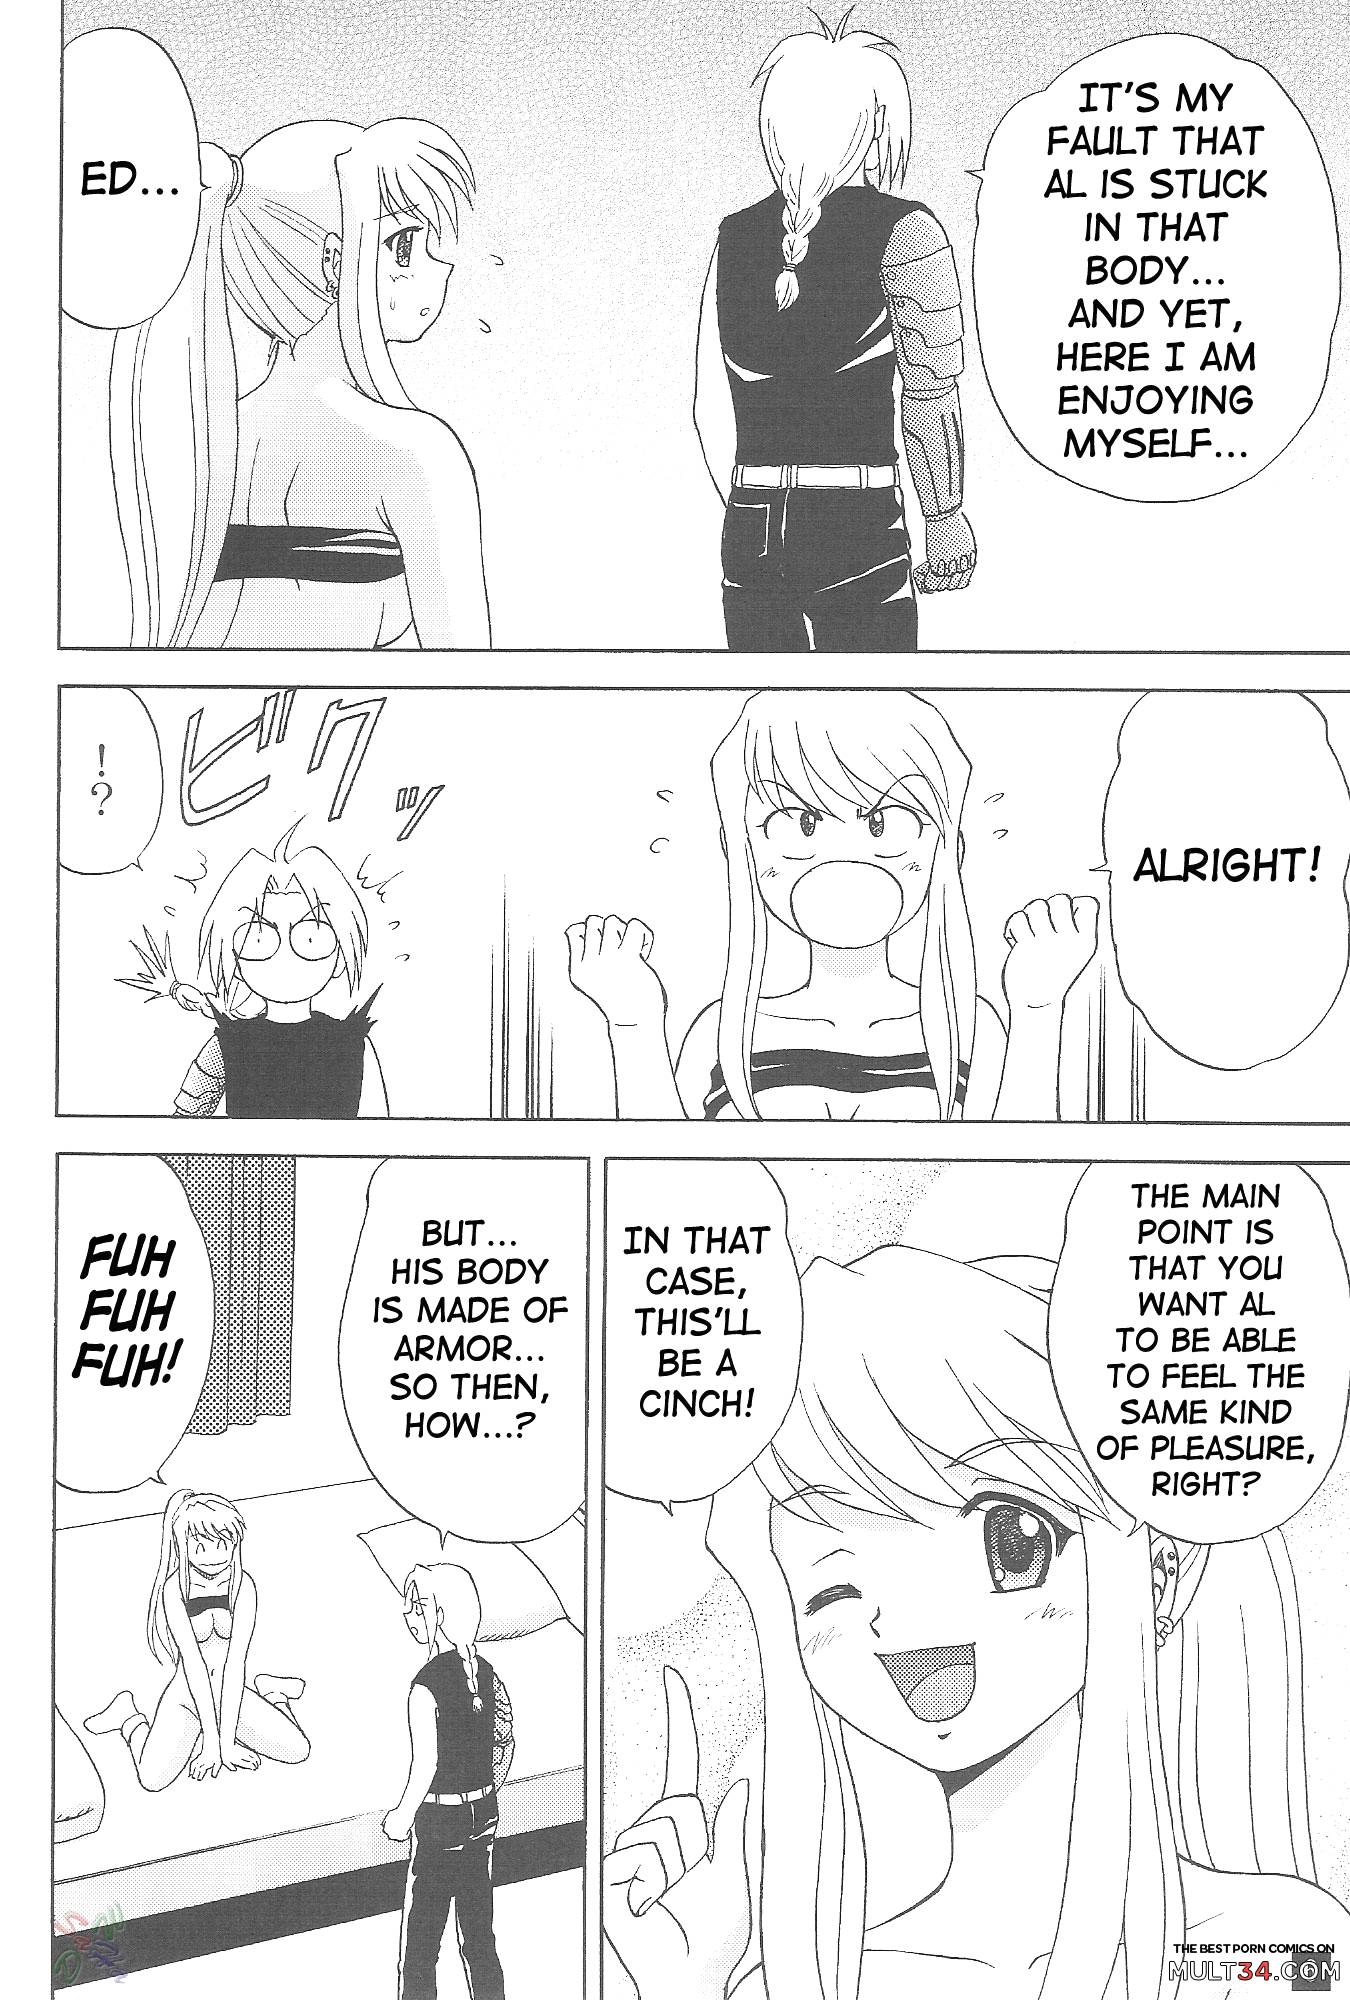 Winry's Vibrator page 5